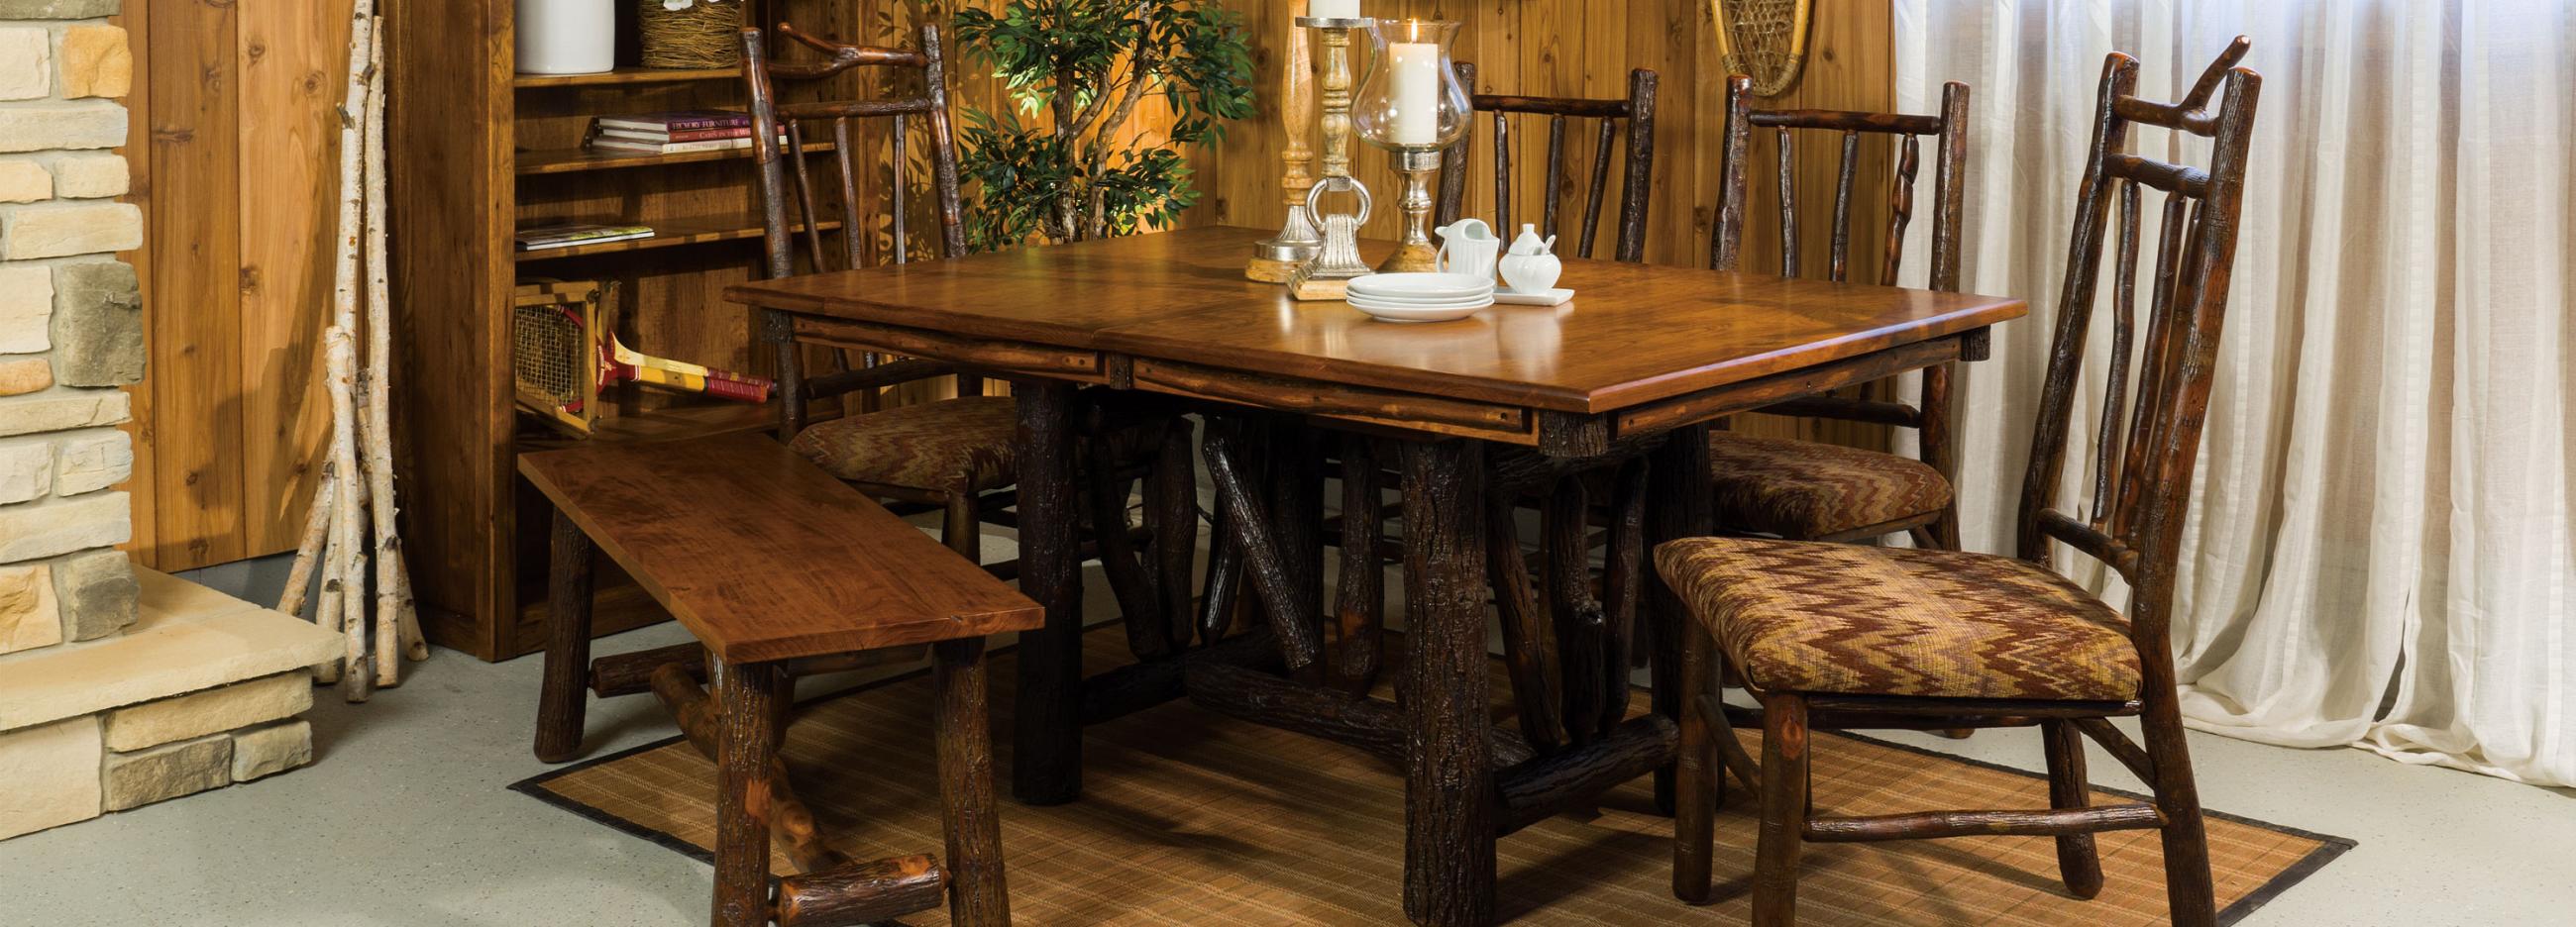 Hilltop Hickory Rustic Dining Room Furniture